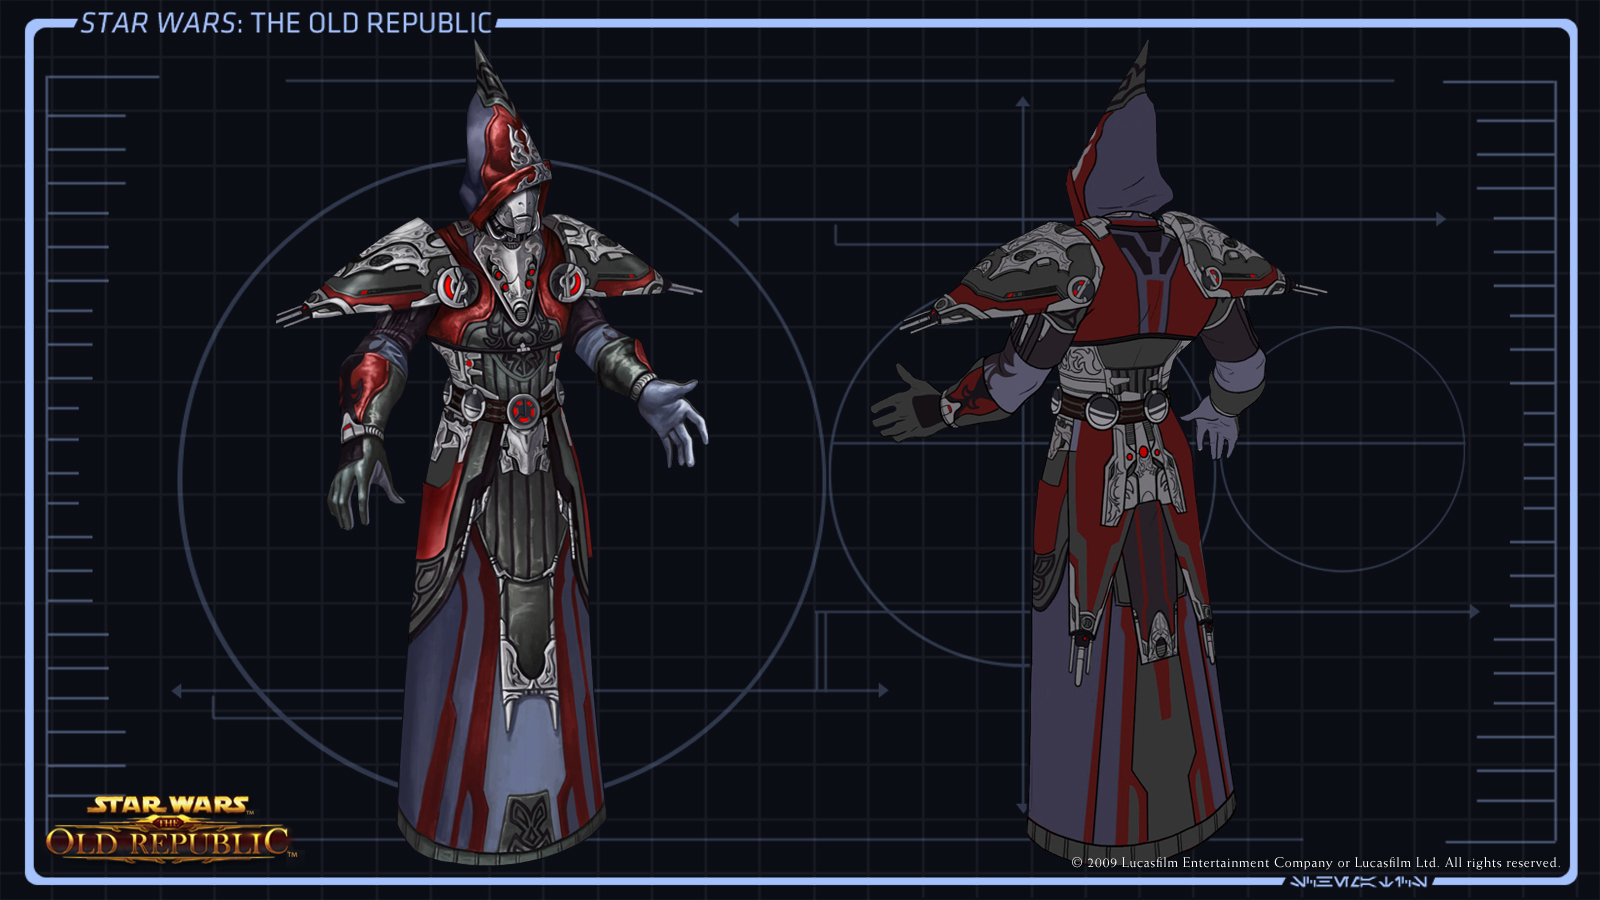 image-sith-inquisitor-uitrusting-3-jpg-star-wars-the-old-republic-wiki-fandom-powered-by